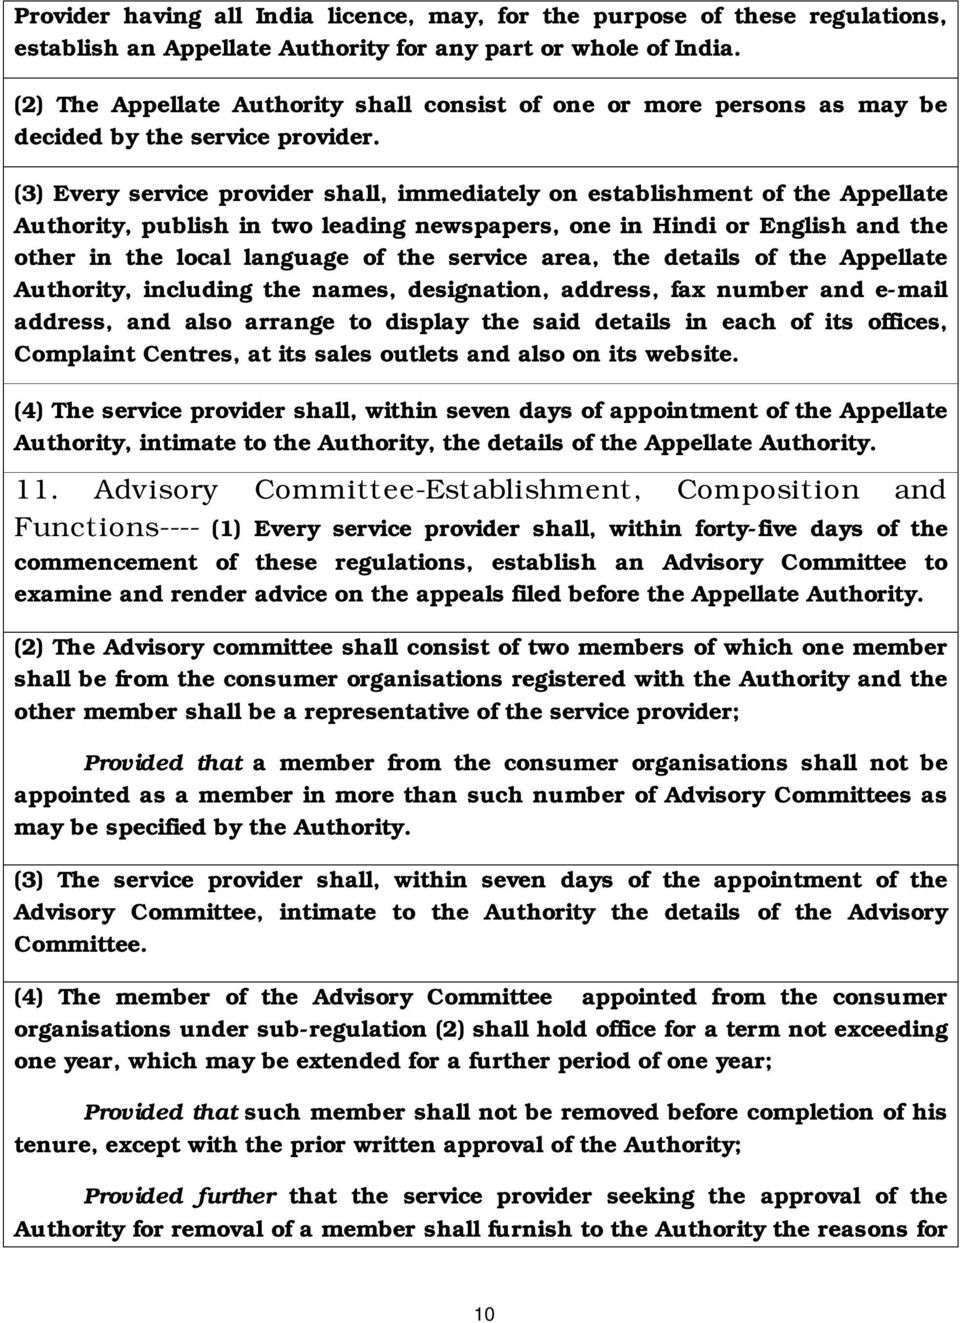 (3) Every service provider shall, immediately on establishment of the Appellate Authority, publish in two leading newspapers, one in Hindi or English and the other in the local language of the